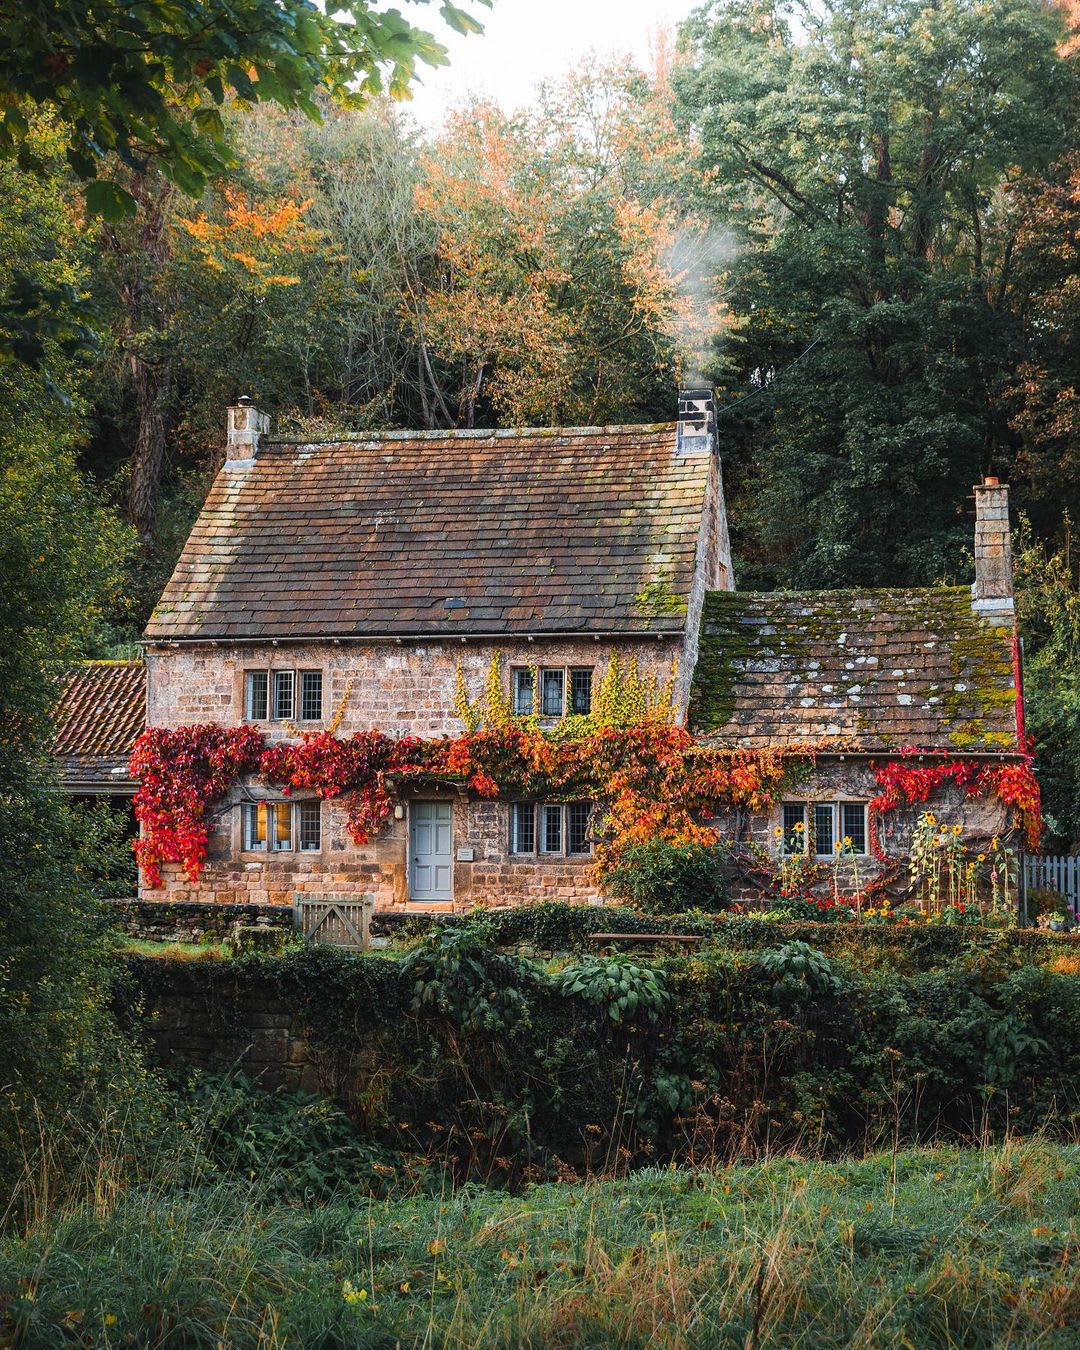 Stone cottage in North Yorkshire, England.